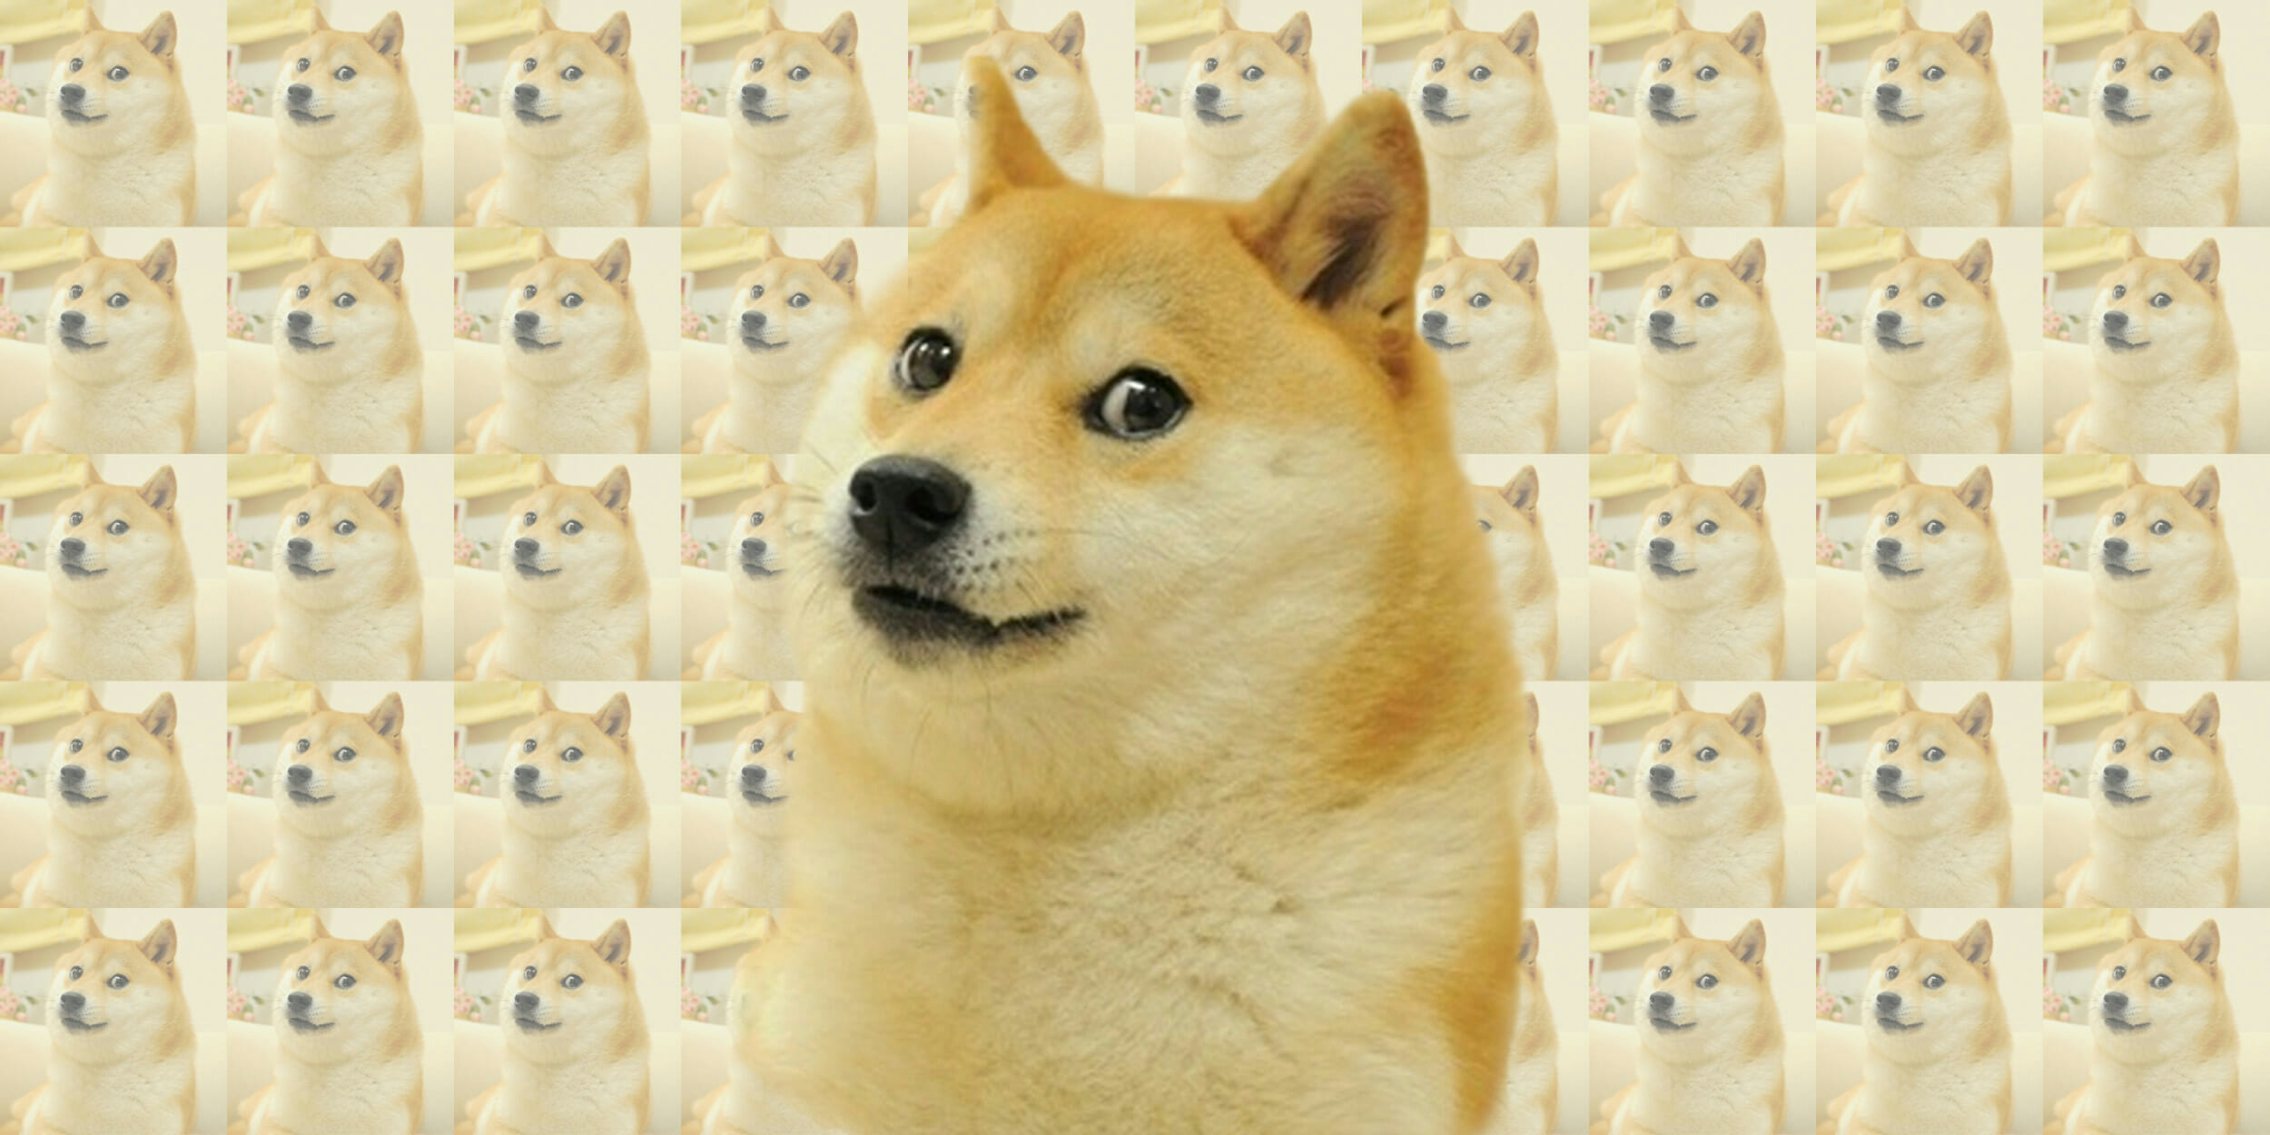 Doge in the foreground with doge pattern as the background